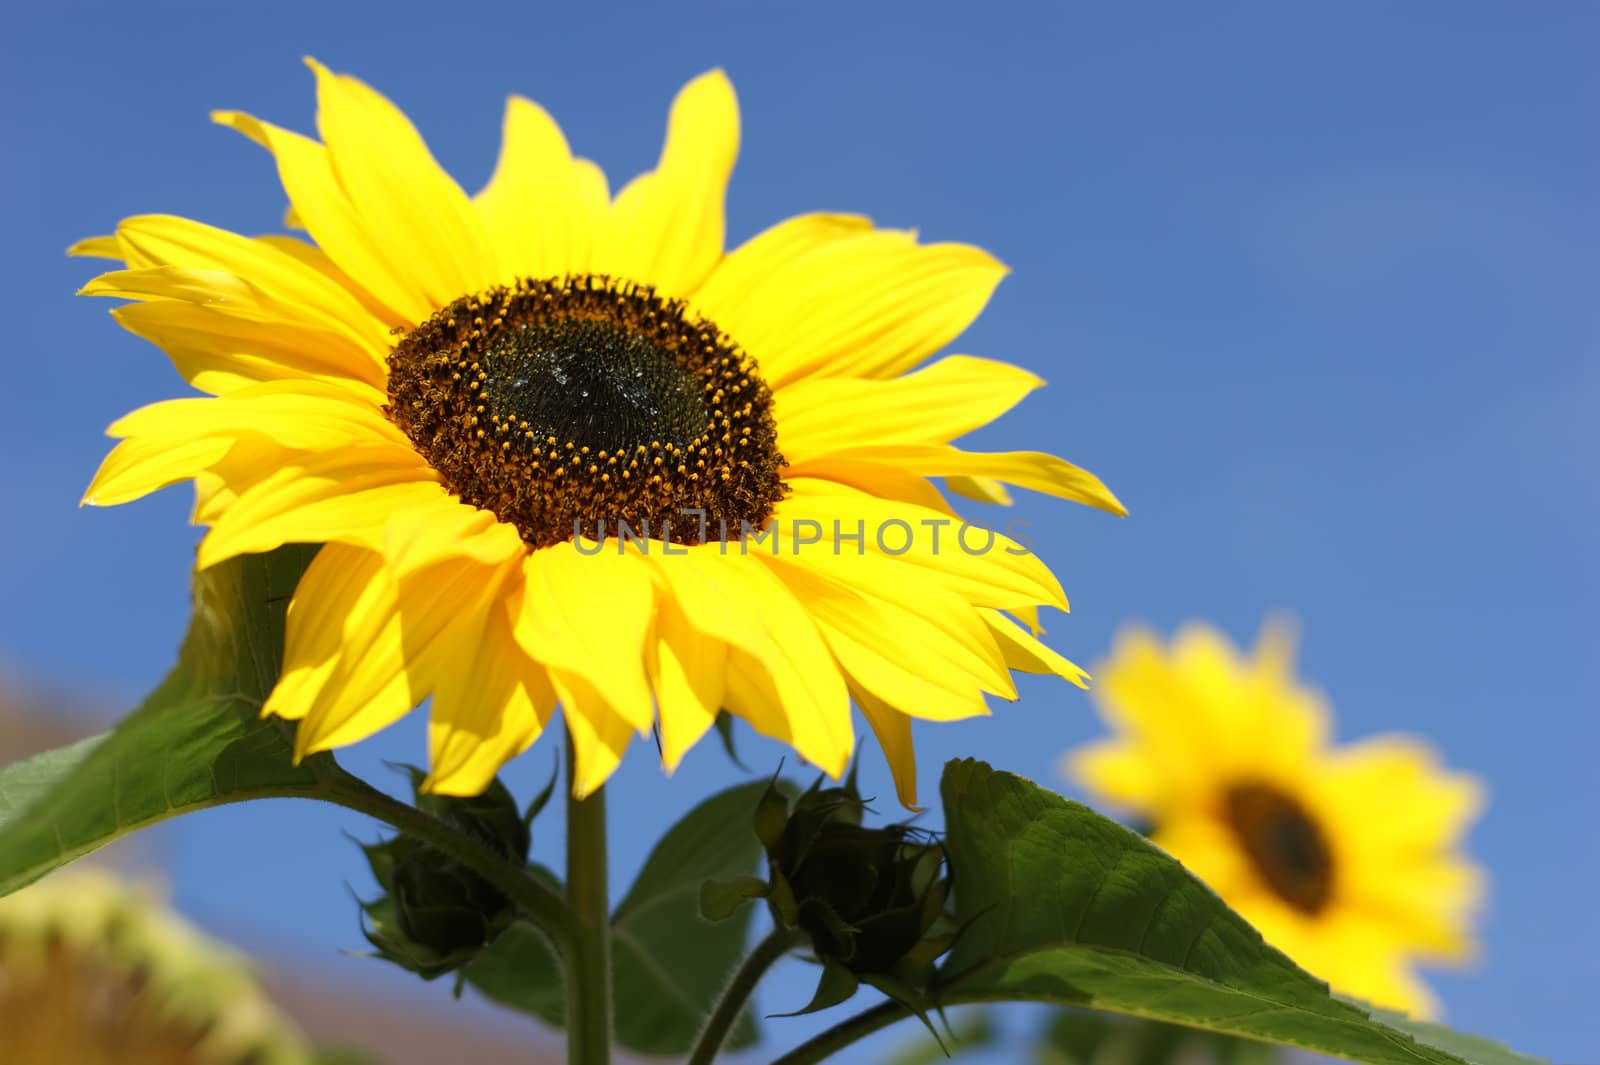 Sunflower in bloom against a blue sky.